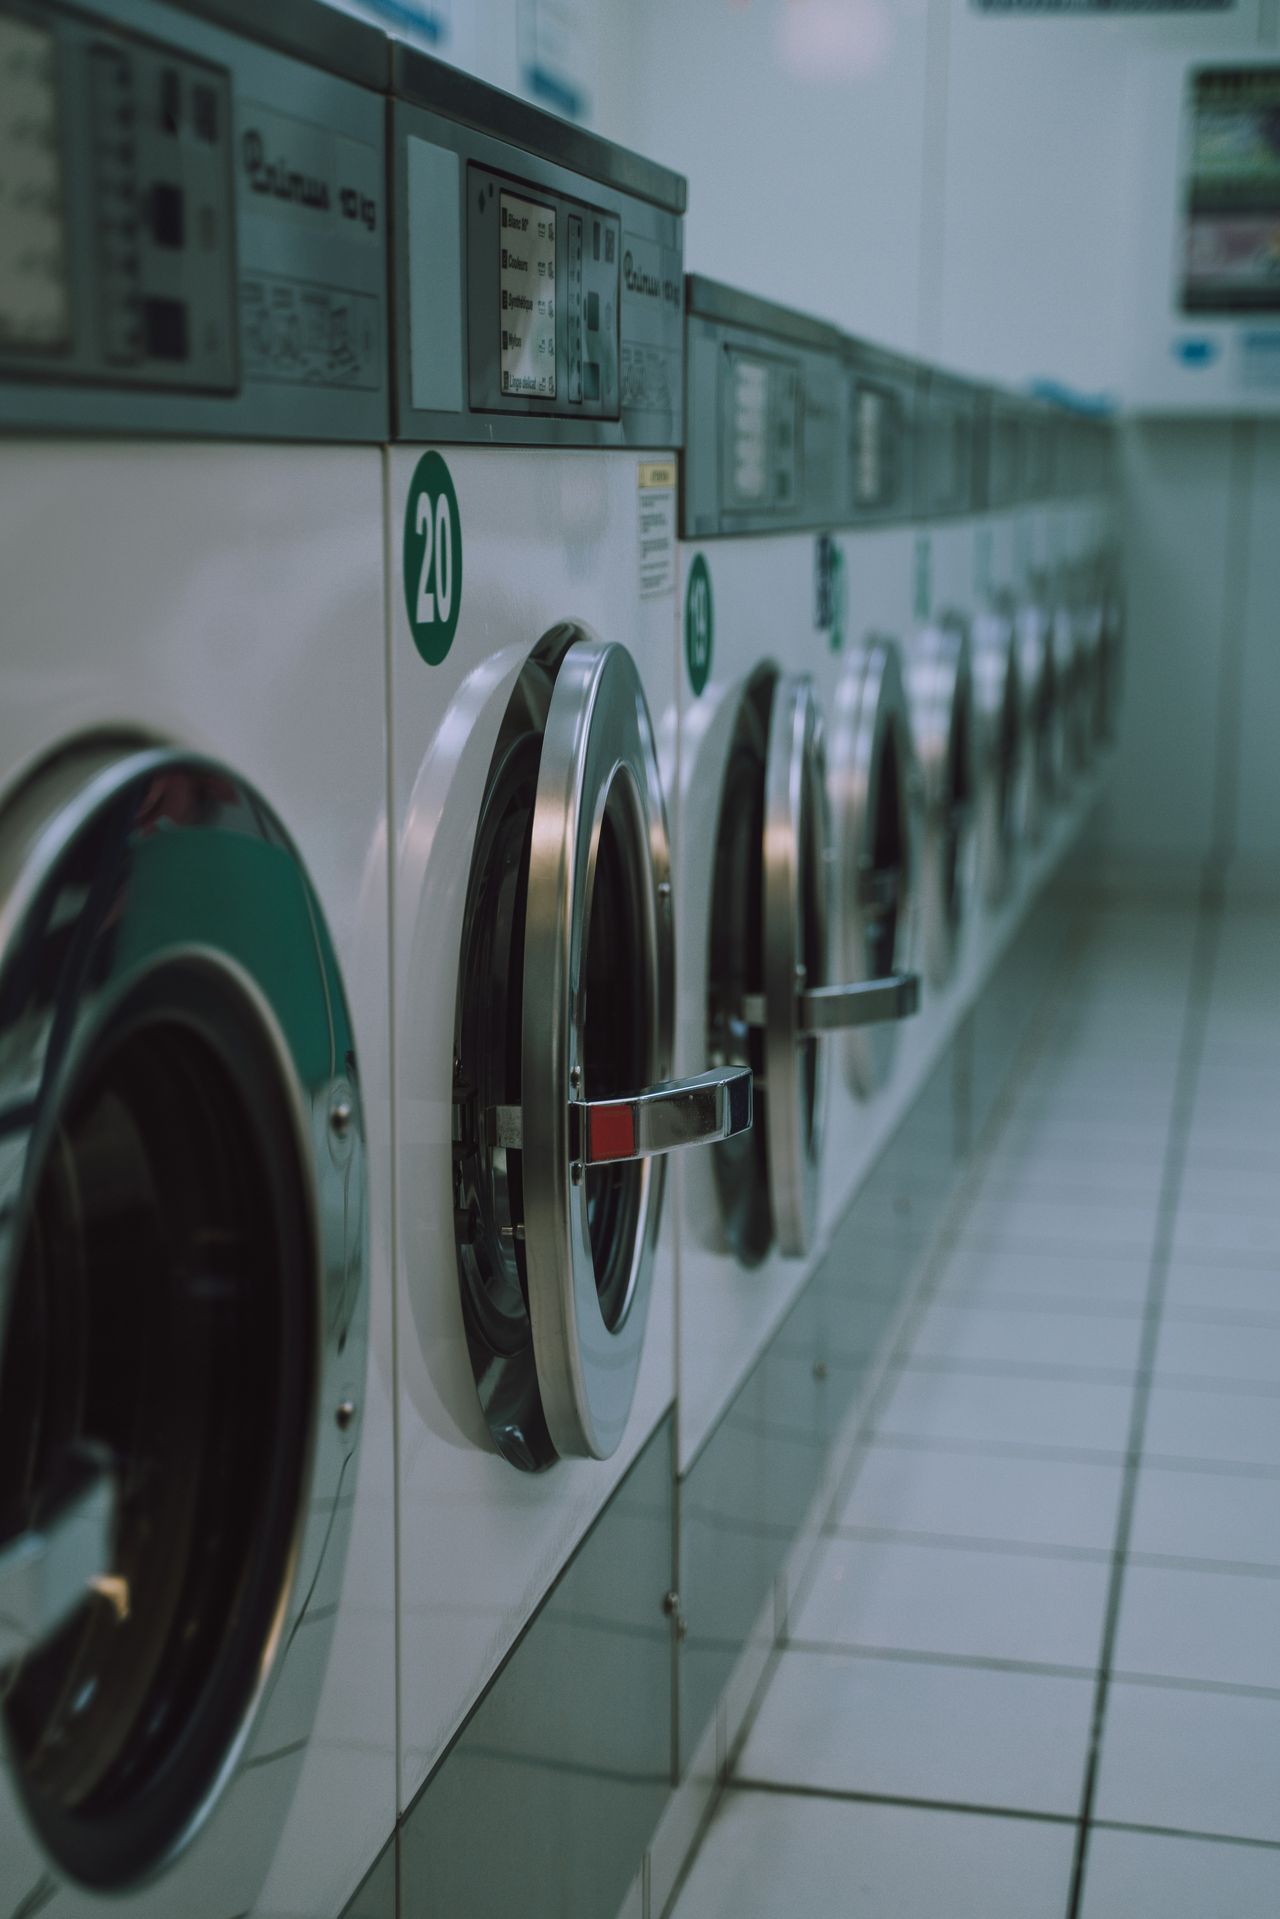 Internet-connected washing machine security flaw